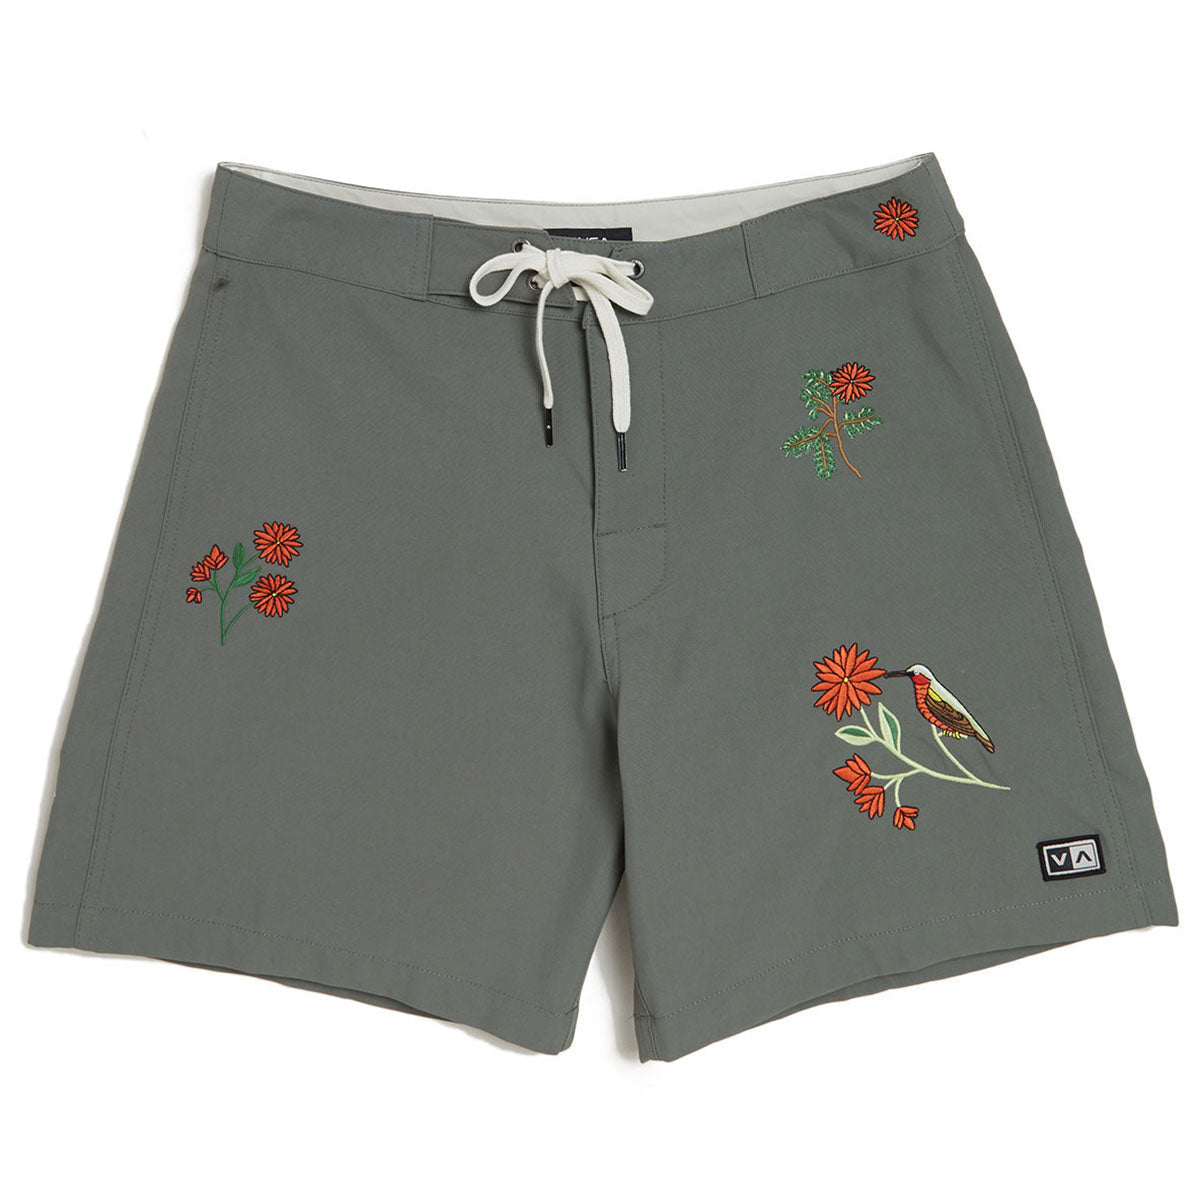 RVCA Anytime Board Shorts - Olive image 1